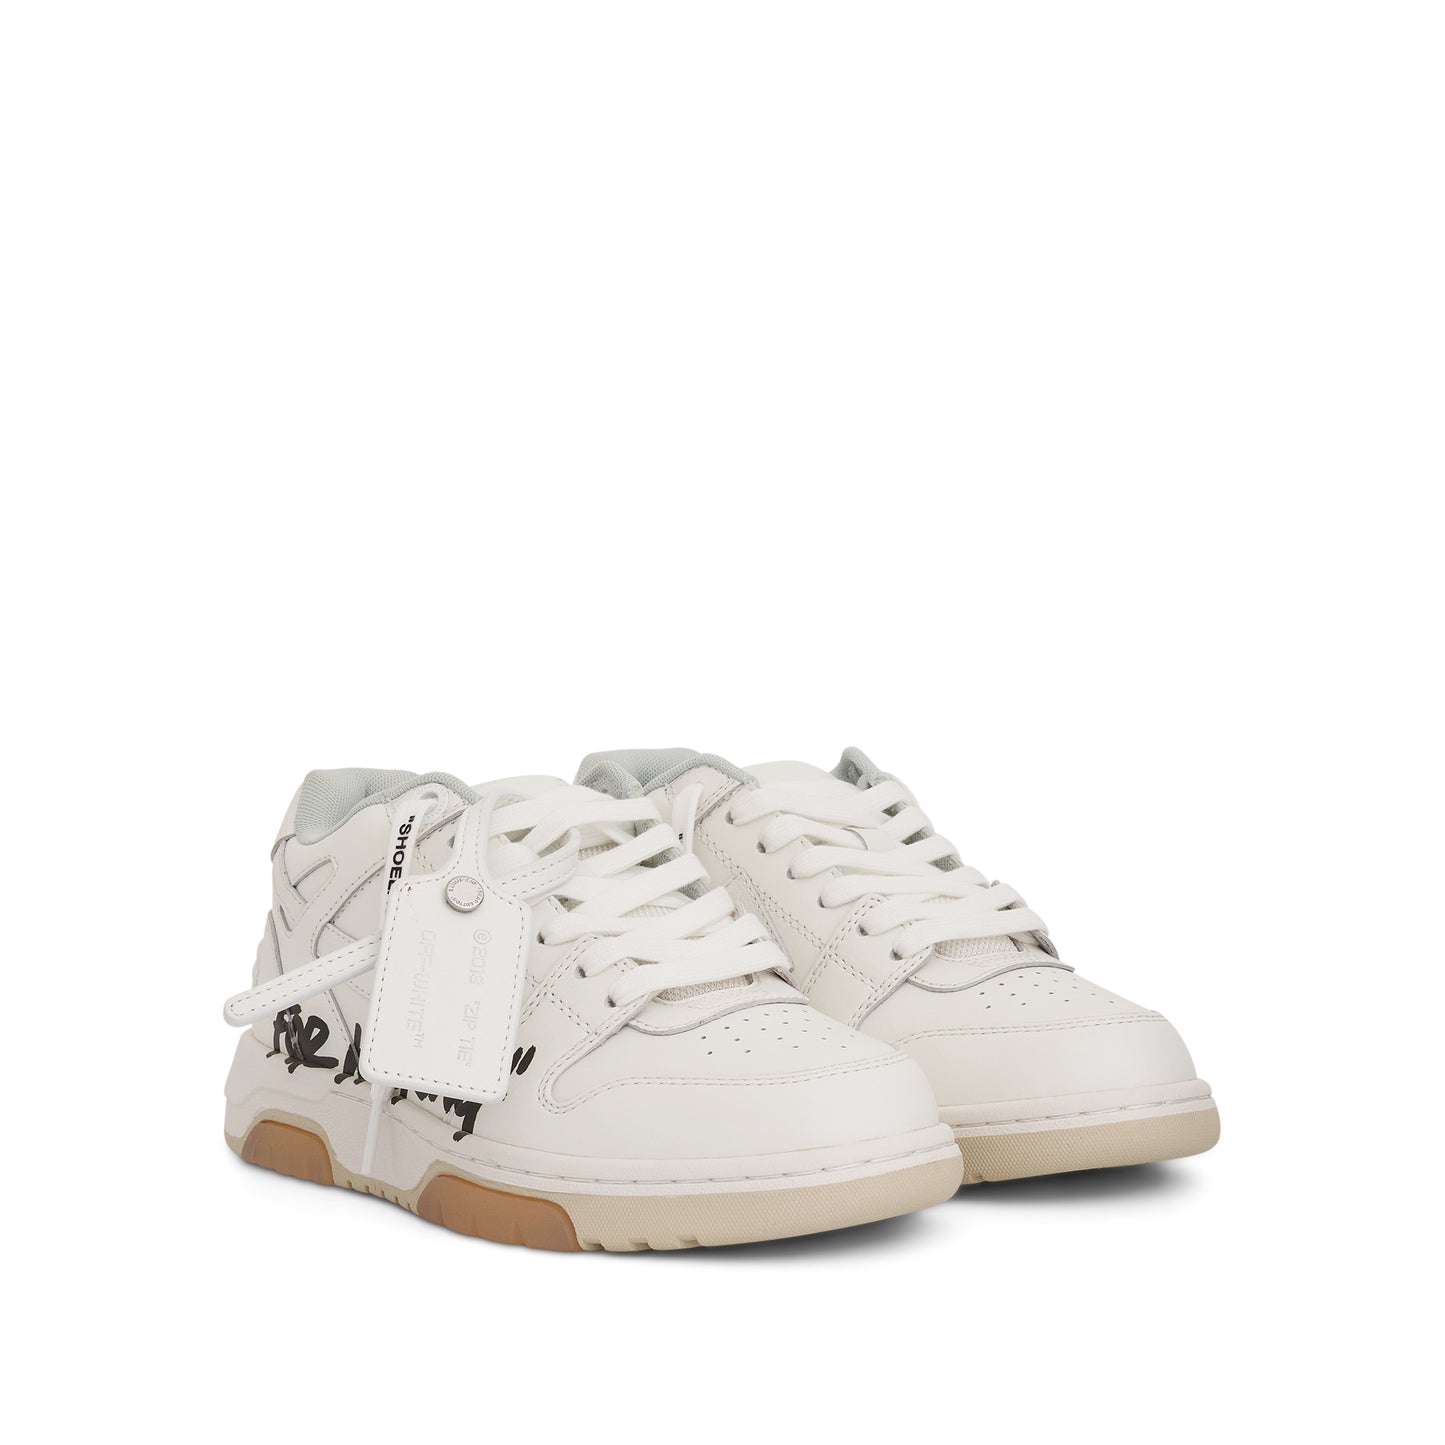 Out Of Office 'For Walking' Leather Sneakers in White/Black